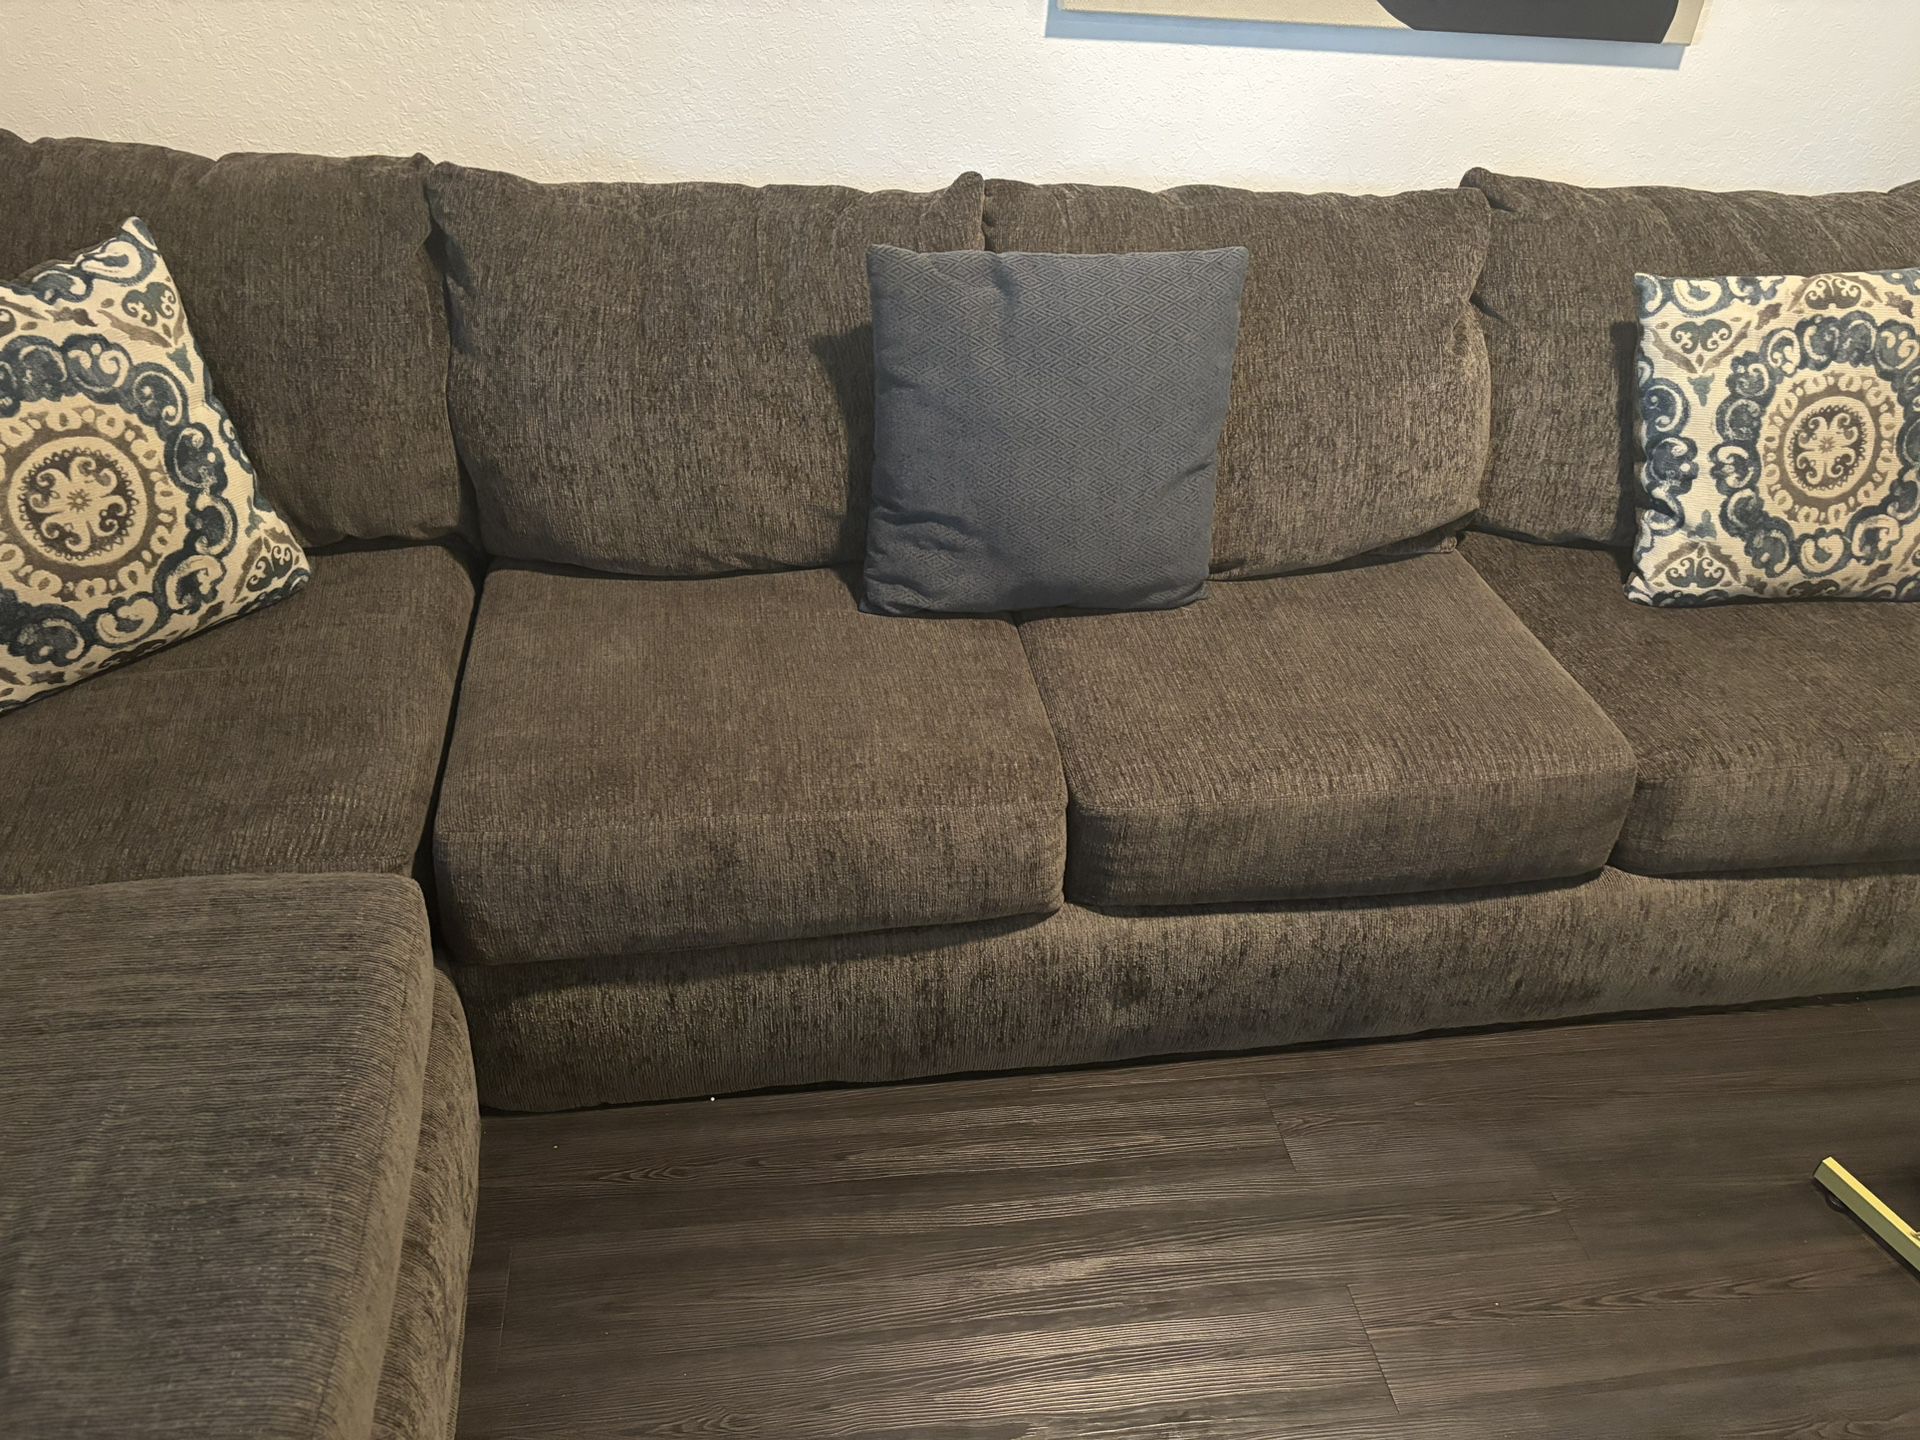 Sectional Couch & Pillows